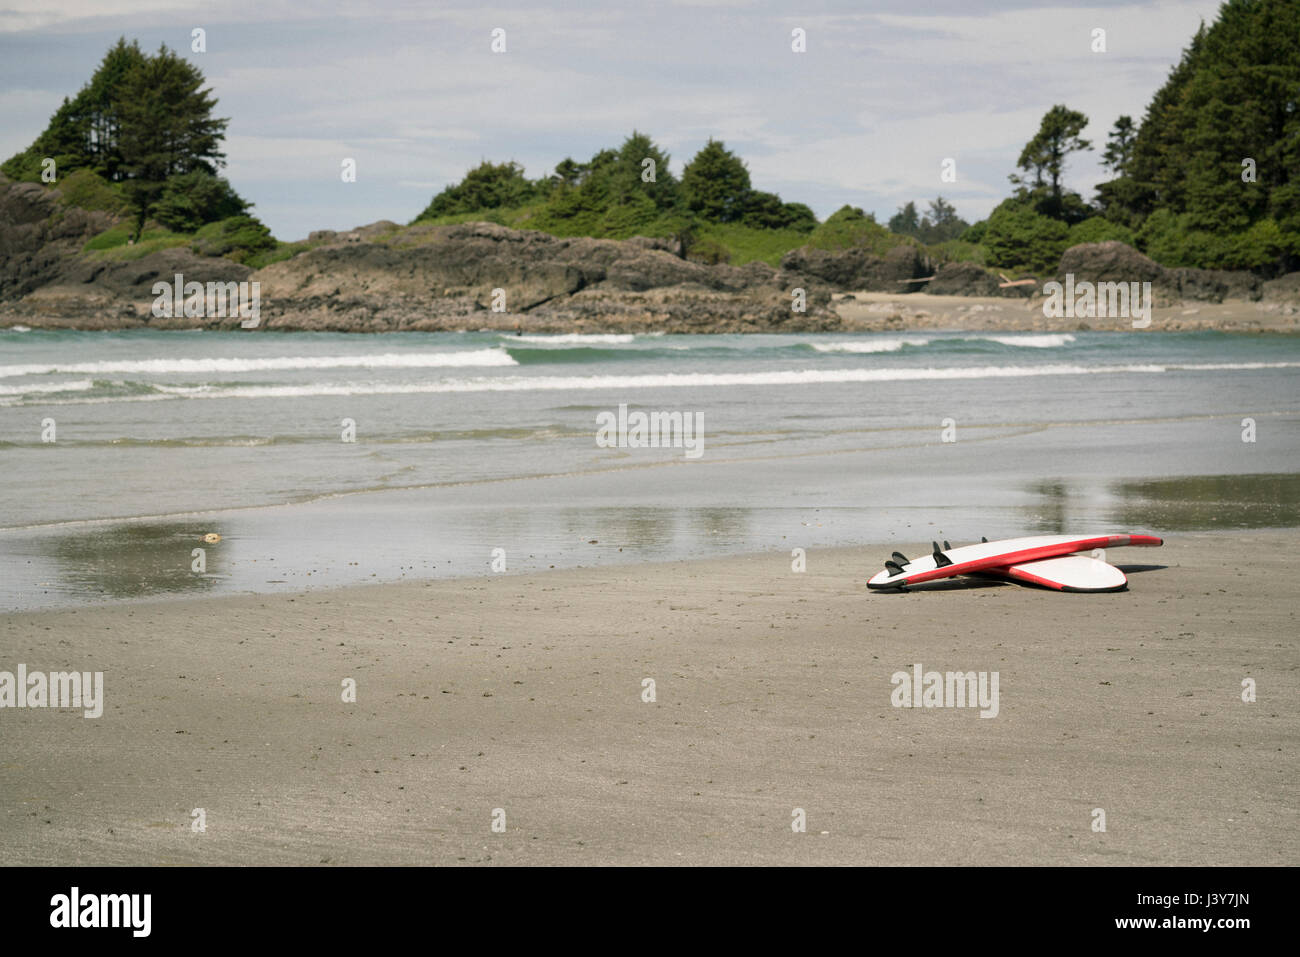 Surfboards on shoreline, Pacific Rim National Park, Vancouver Island, Canada Stock Photo